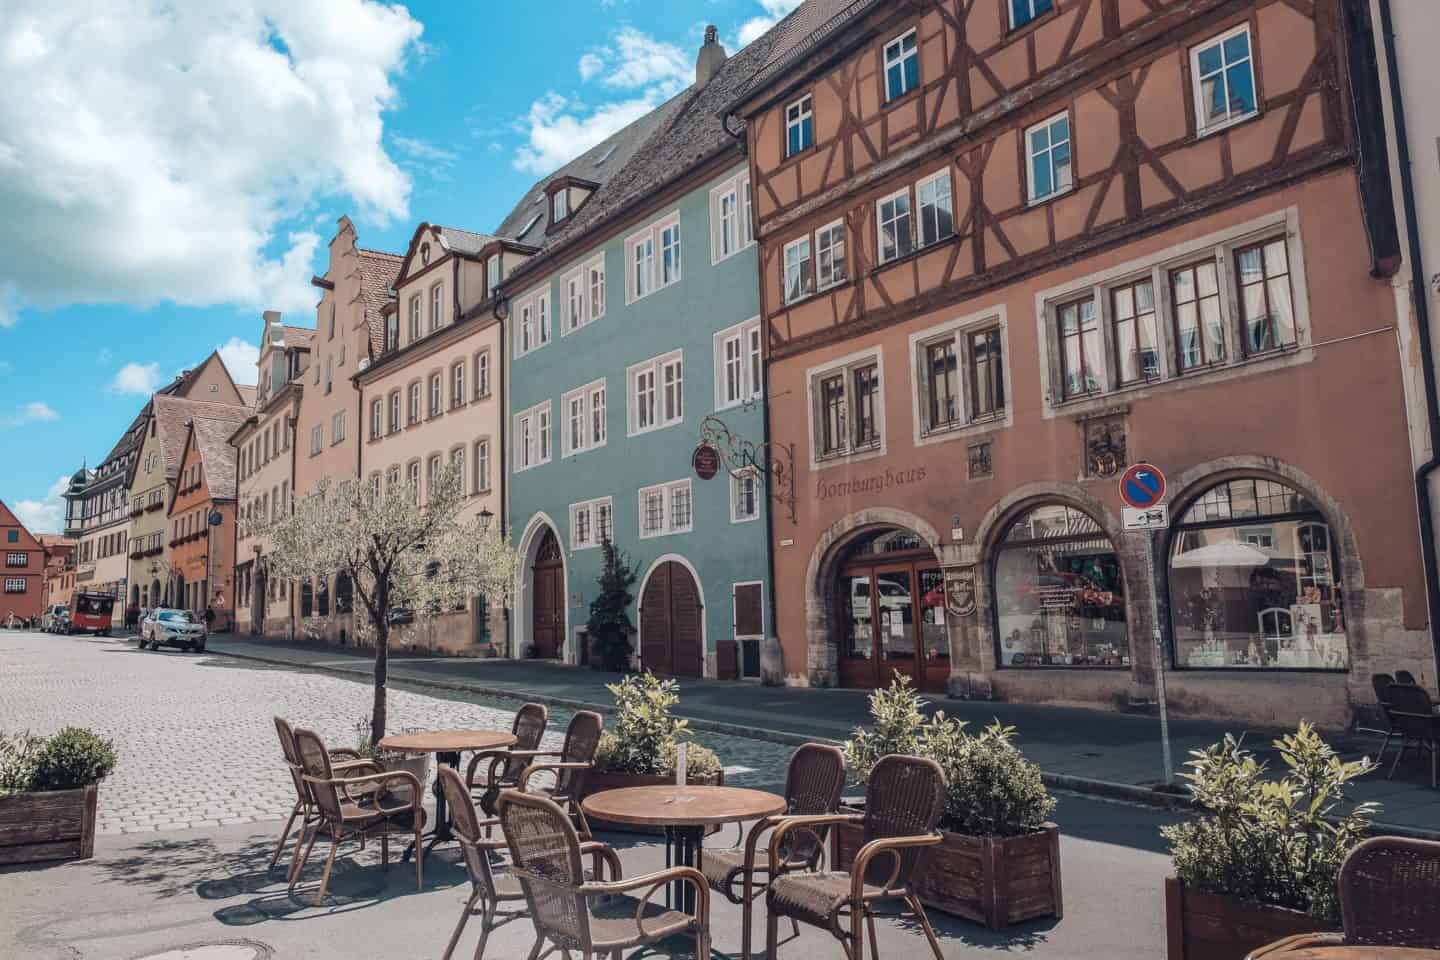 View of old street and multicolored buildings on one of the best Day Trips From Nuremberg